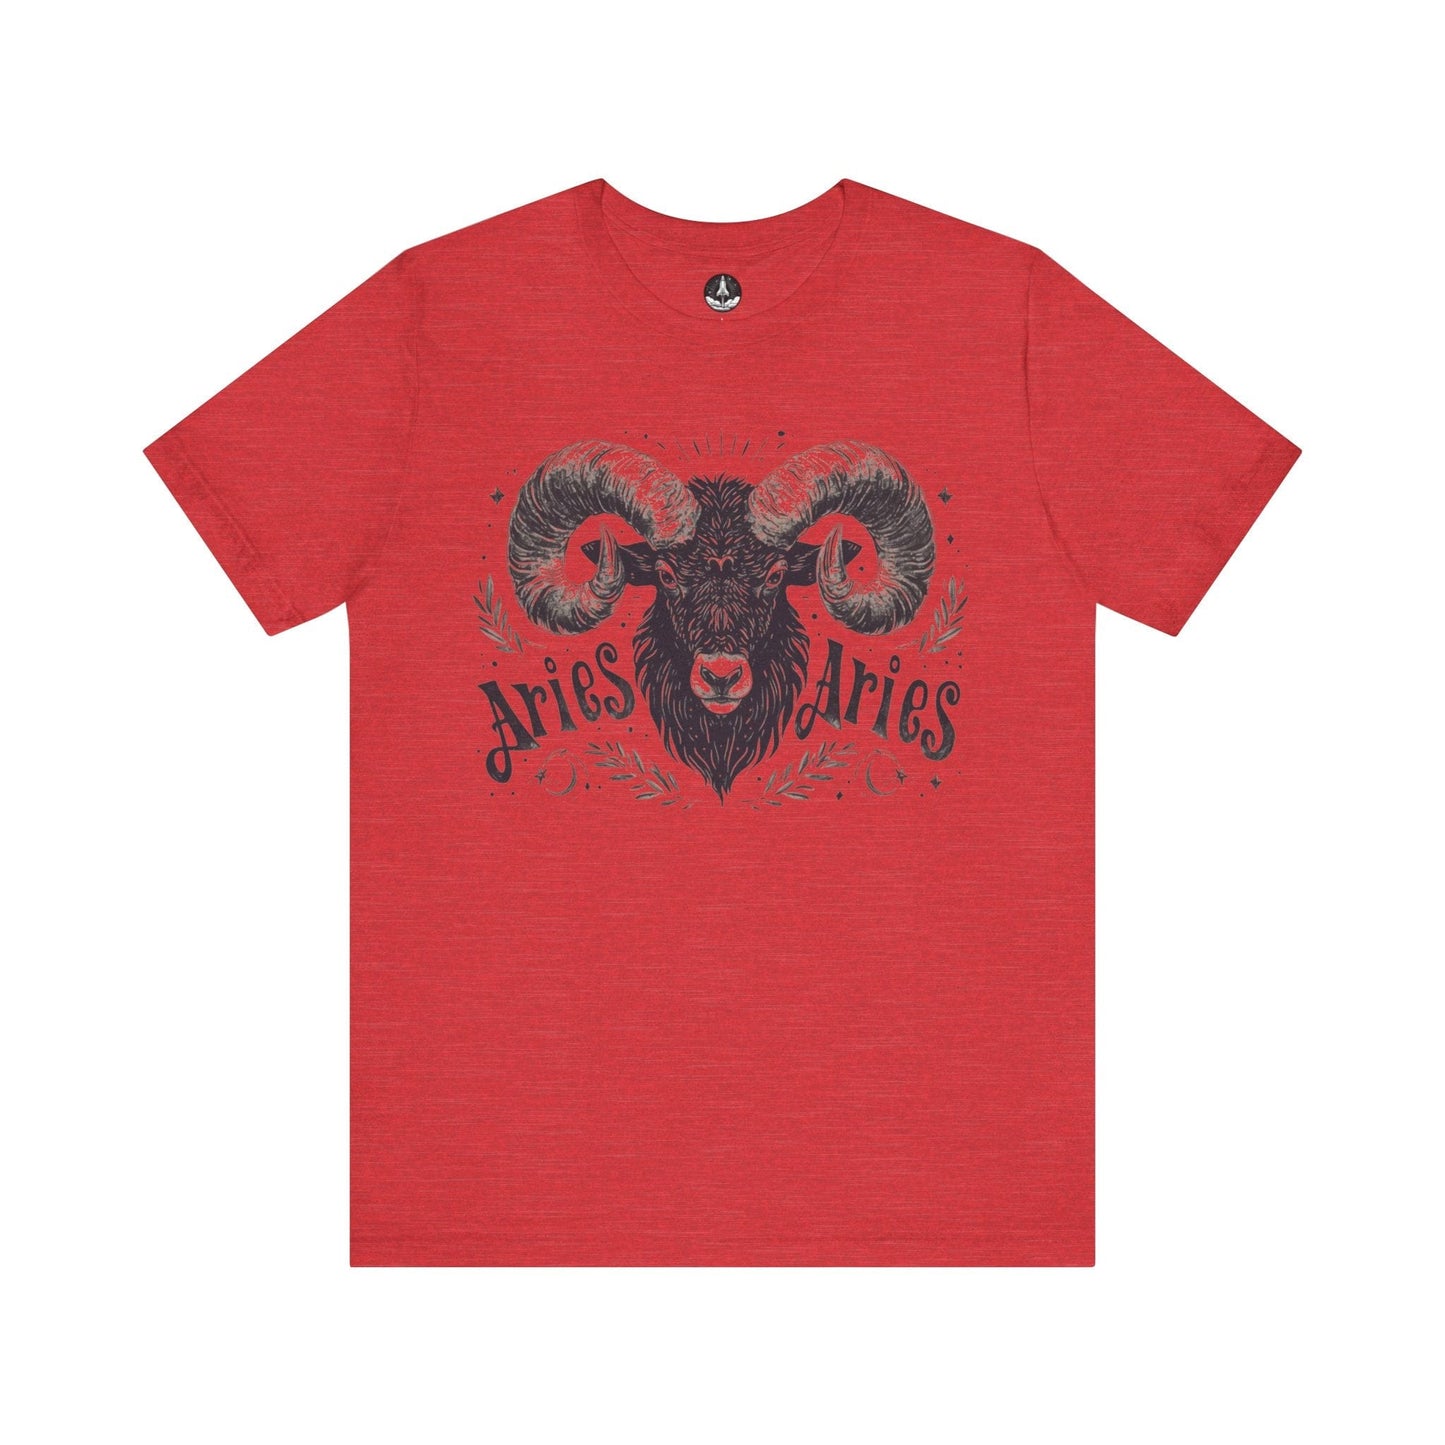 T-Shirt Heather Red / S Aries Astrology Unisex TShirt: An Ode to the Maverick